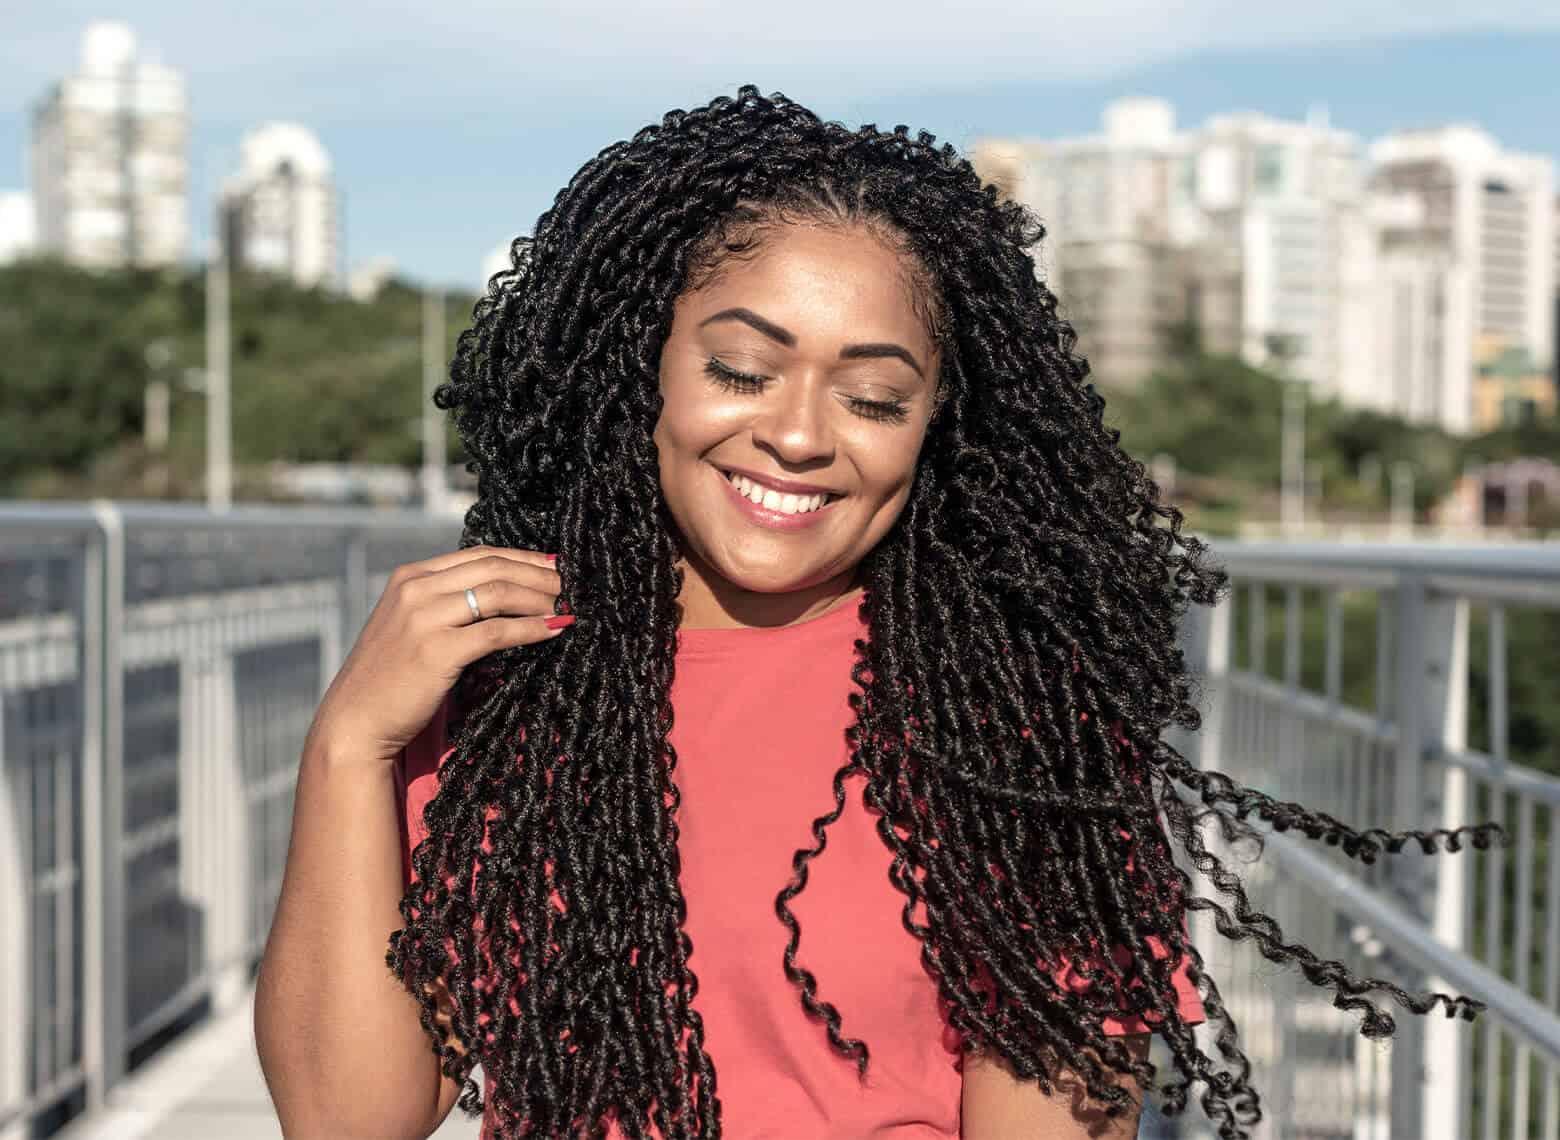 7 Hairstyles With Braids for Black Women to Try - Seafood